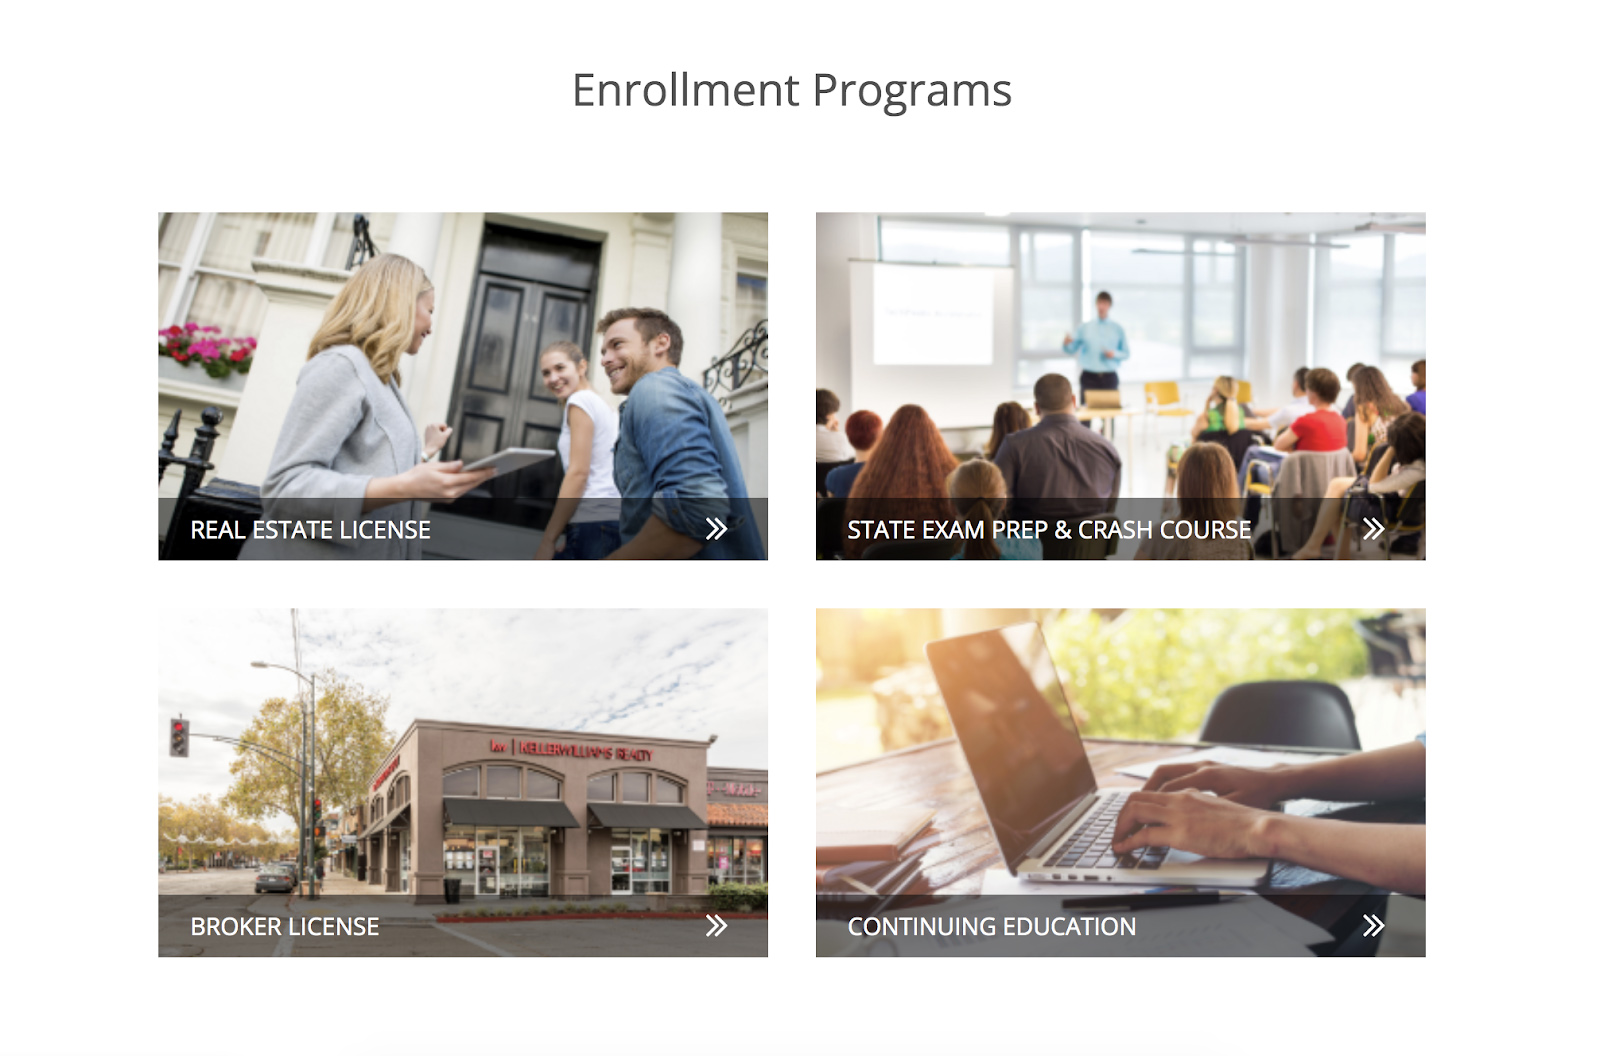 Squares with different images representing various enrollment programs offered.